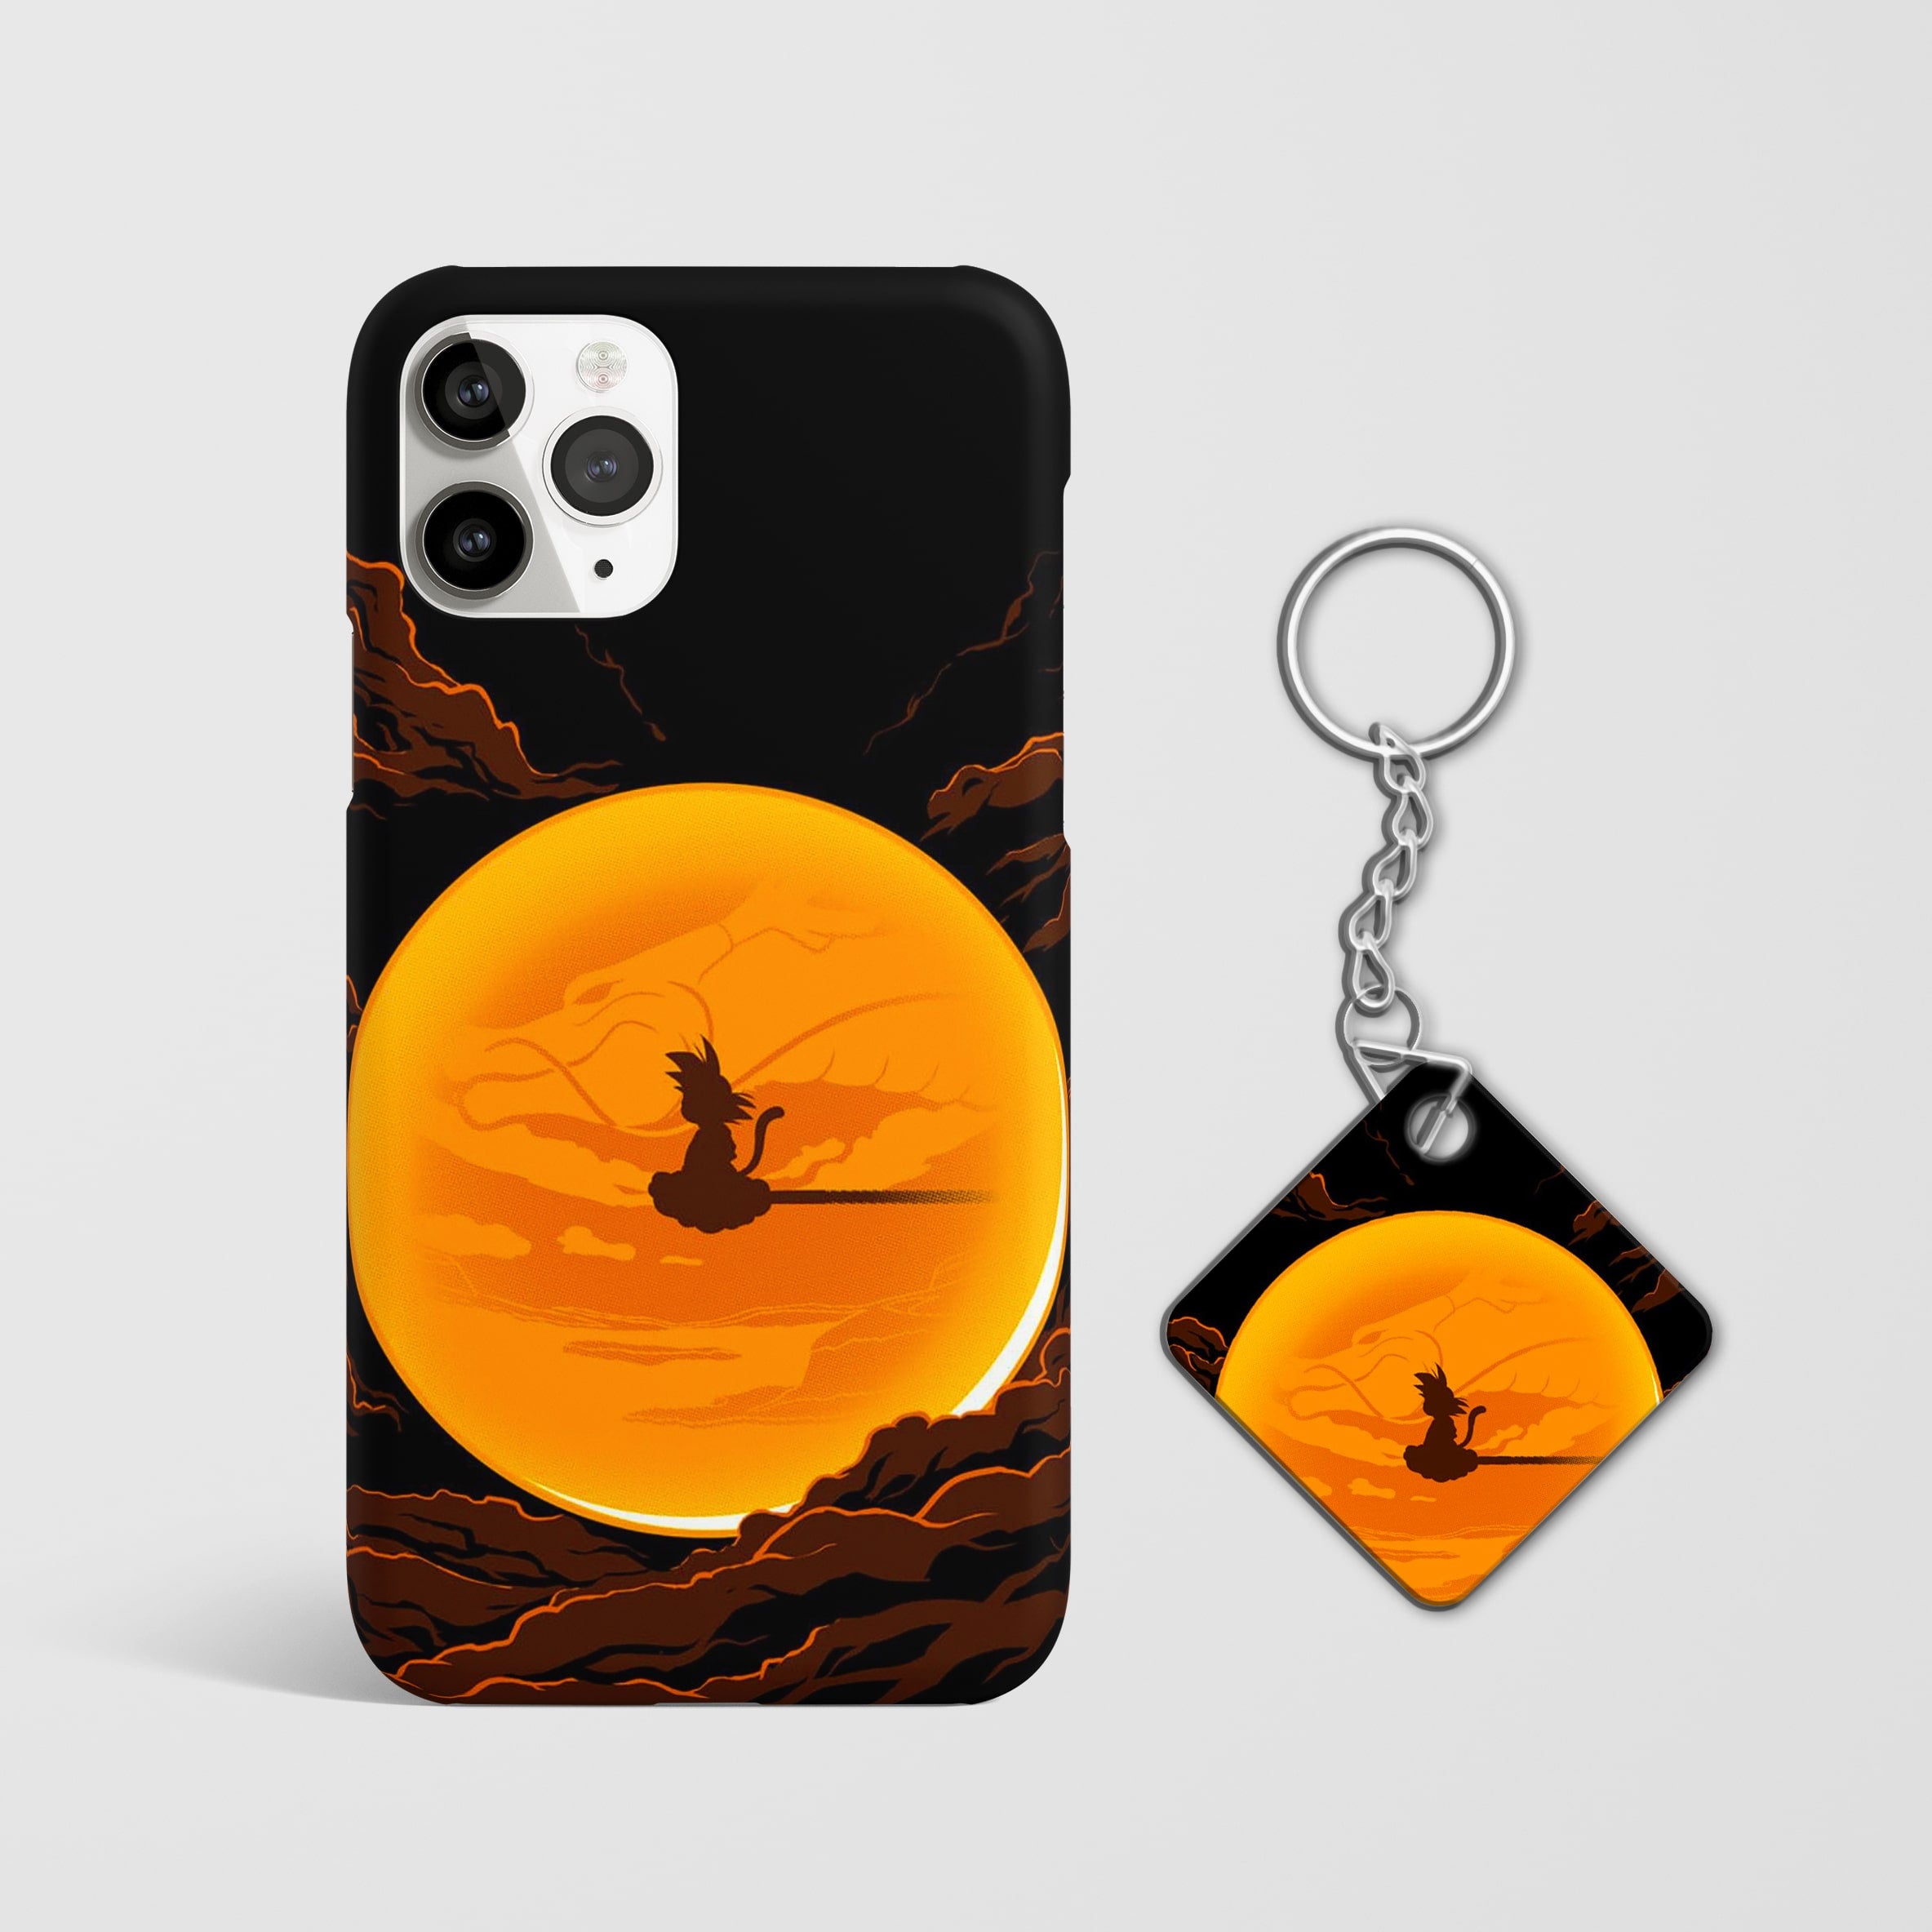 Close-up of Gohan and Nimbus illustration on phone case with Keychain.